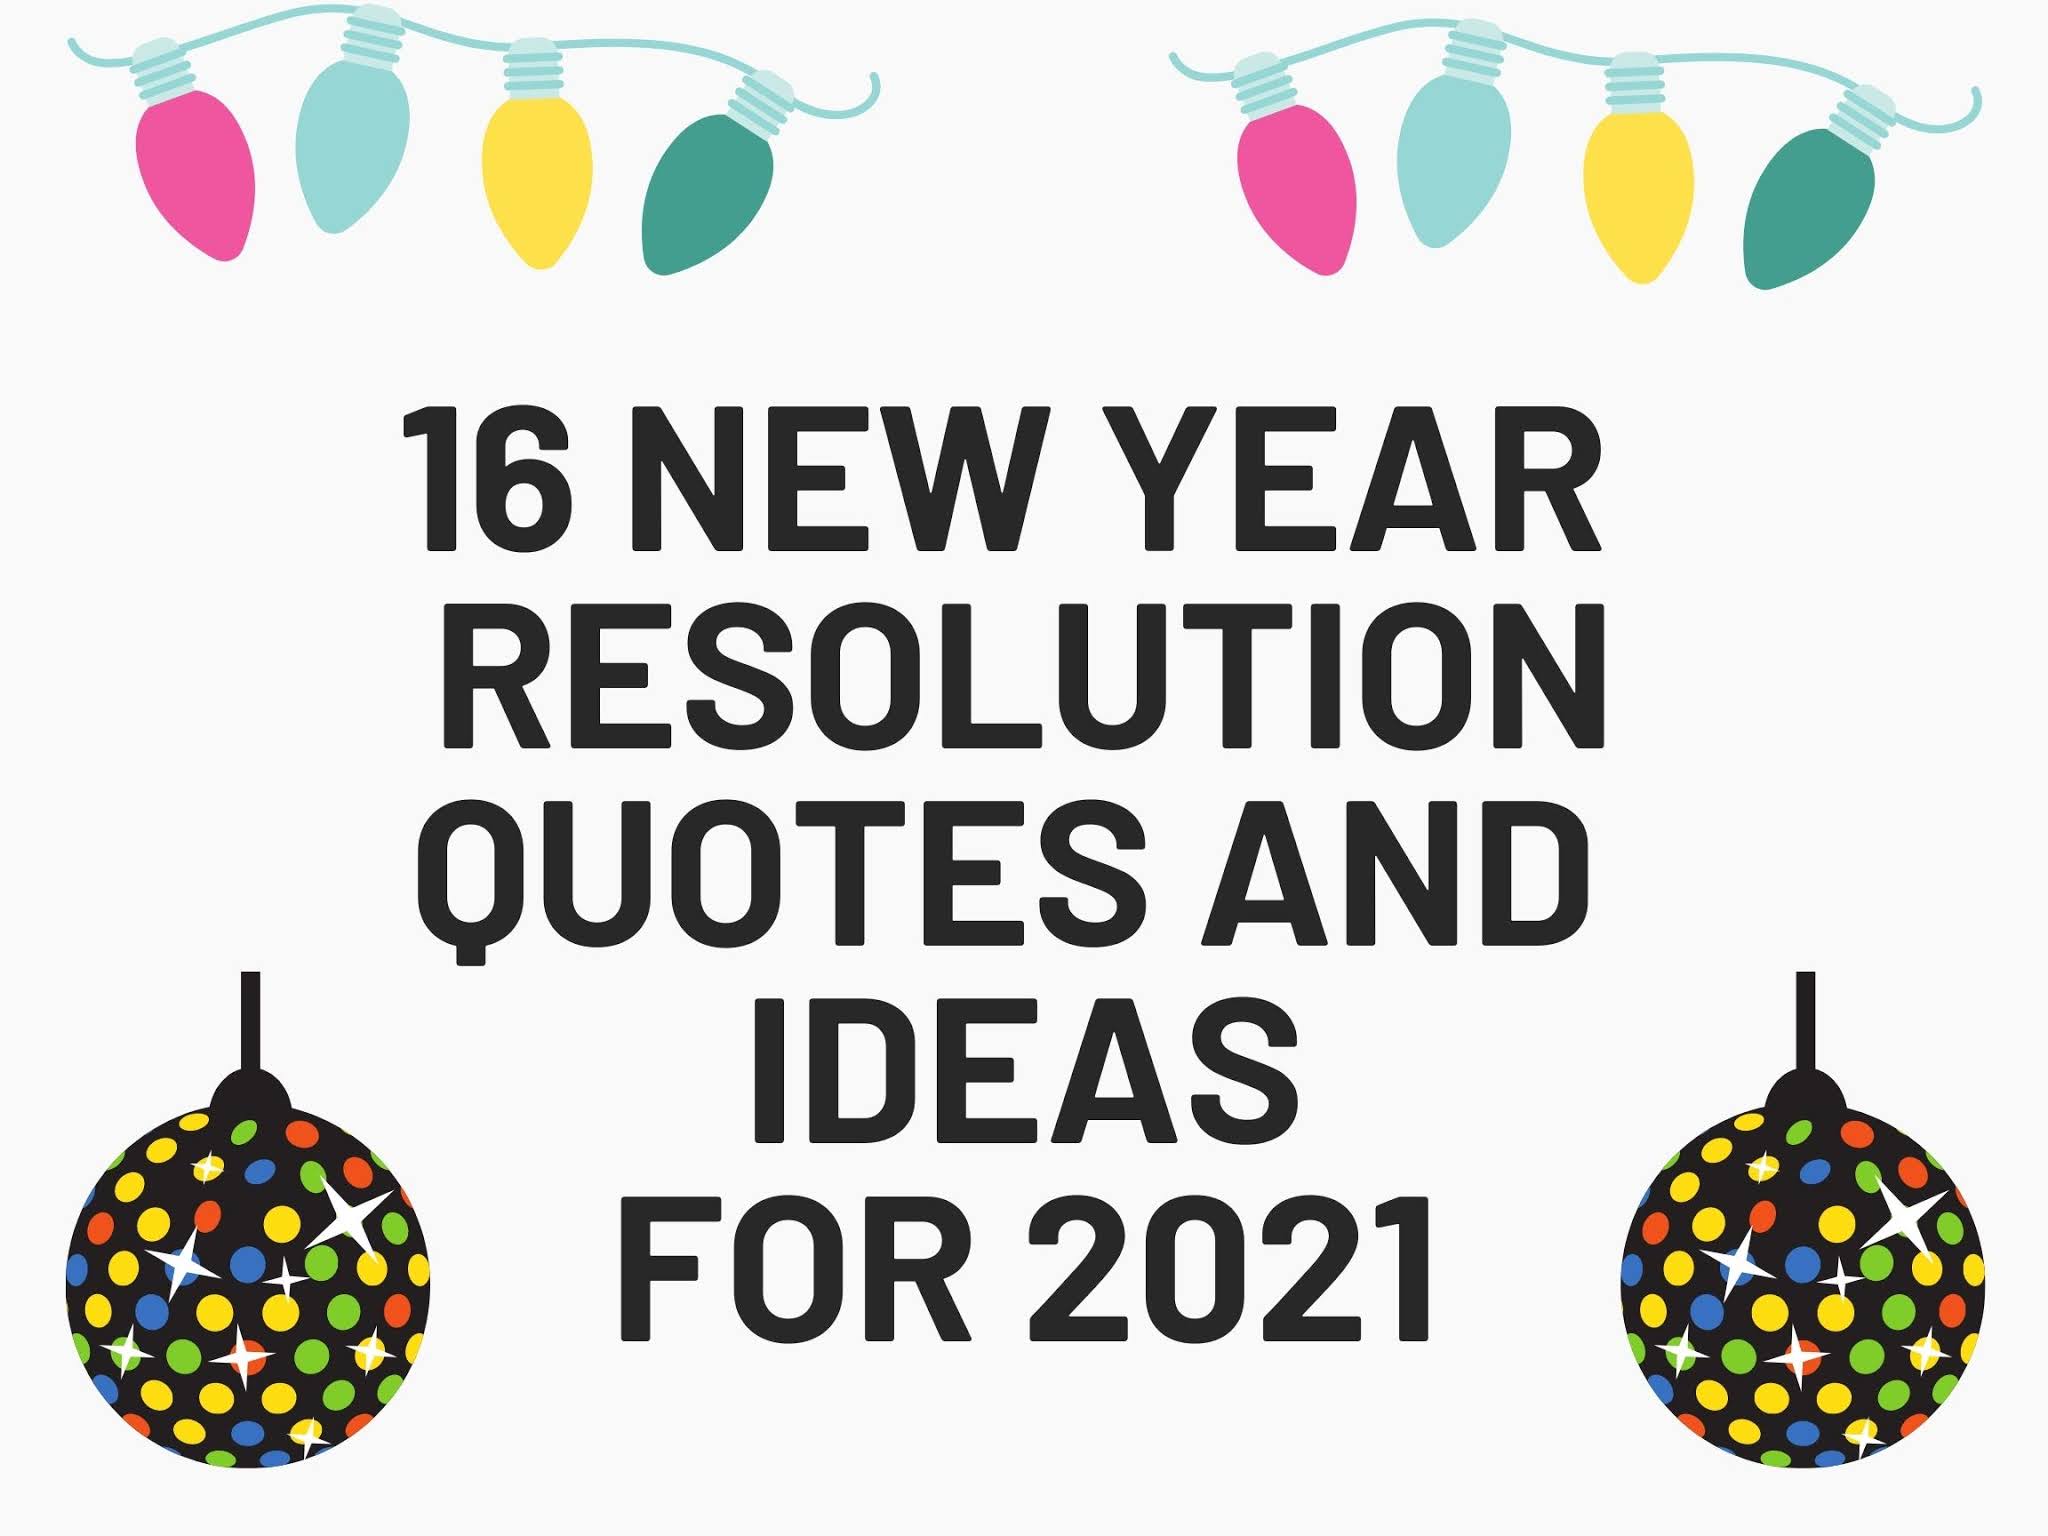 New year resolutions ideas and quotes